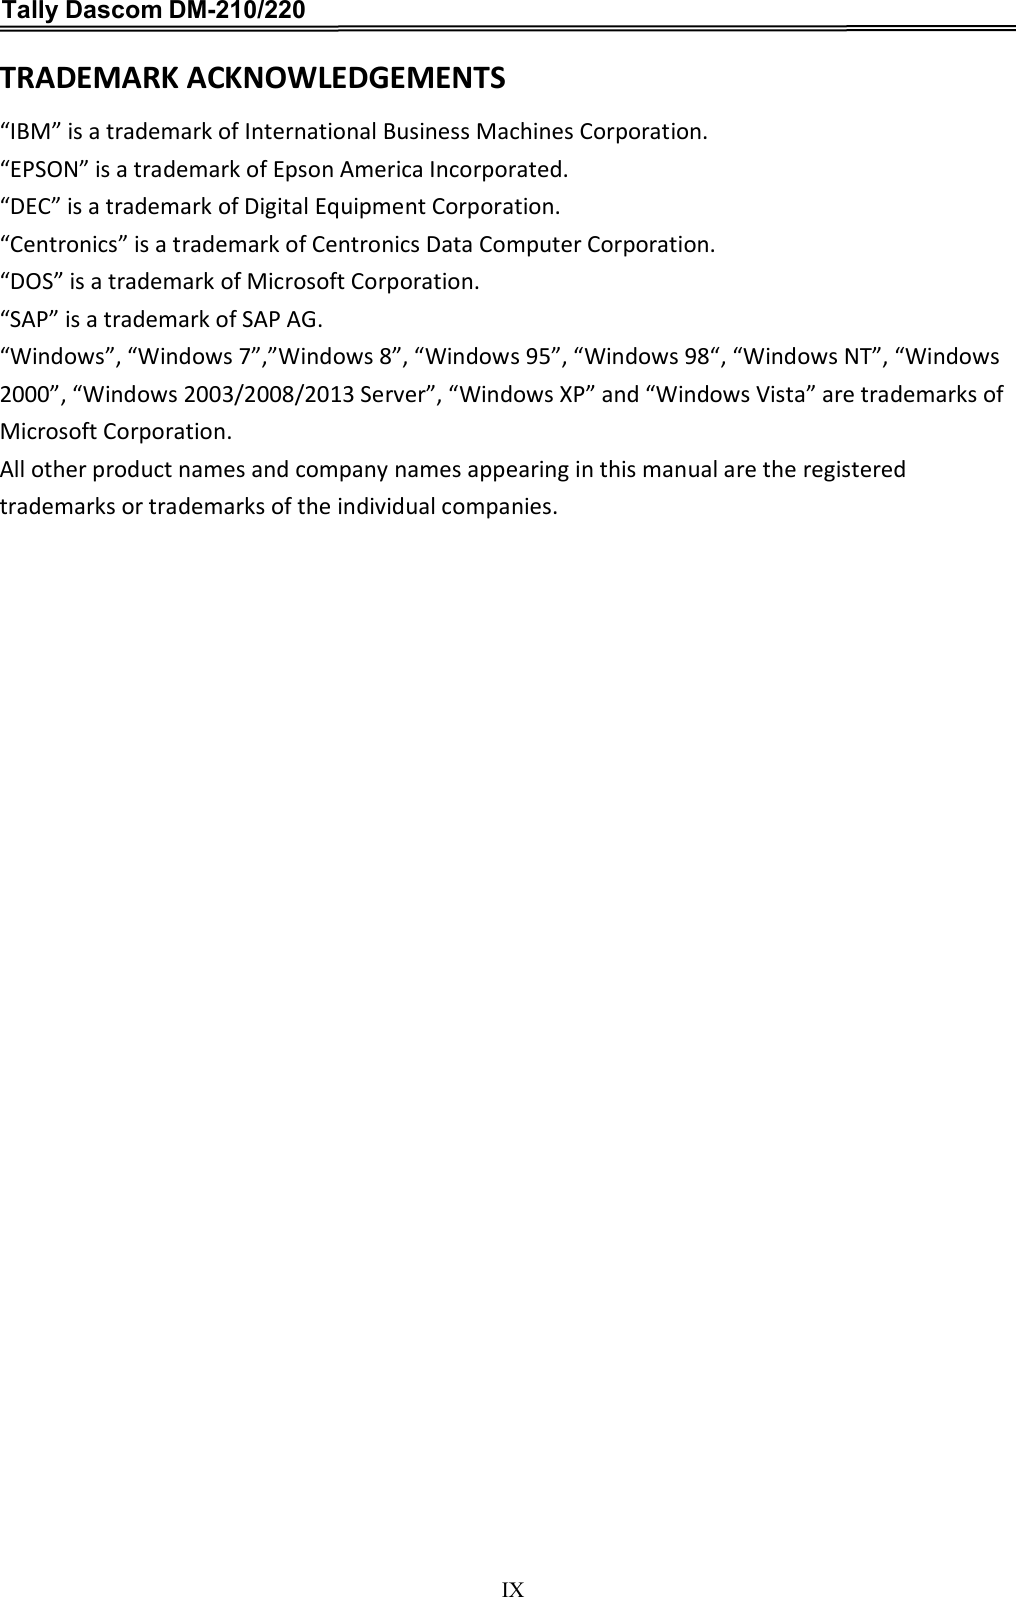 Tally Dascom DM-210/220   IX TRADEMARK ACKNOWLEDGEMENTS “IBM” is a trademark of International Business Machines Corporation.   “EPSON” is a trademark of Epson America Incorporated.   “DEC” is a trademark of Digital Equipment Corporation.   “Centronics” is a trademark of Centronics Data Computer Corporation.   “DOS” is a trademark of Microsoft Corporation.   “SAP” is a trademark of SAP AG.   “Windows”, “Windows 7”,”Windows 8”, “Windows 95”, “Windows 98“, “Windows NT”, “Windows 2000”, “Windows 2003/2008/2013 Server”, “Windows XP” and “Windows Vista” are trademarks of Microsoft Corporation.   All other product names and company names appearing in this manual are the registered trademarks or trademarks of the individual companies.   